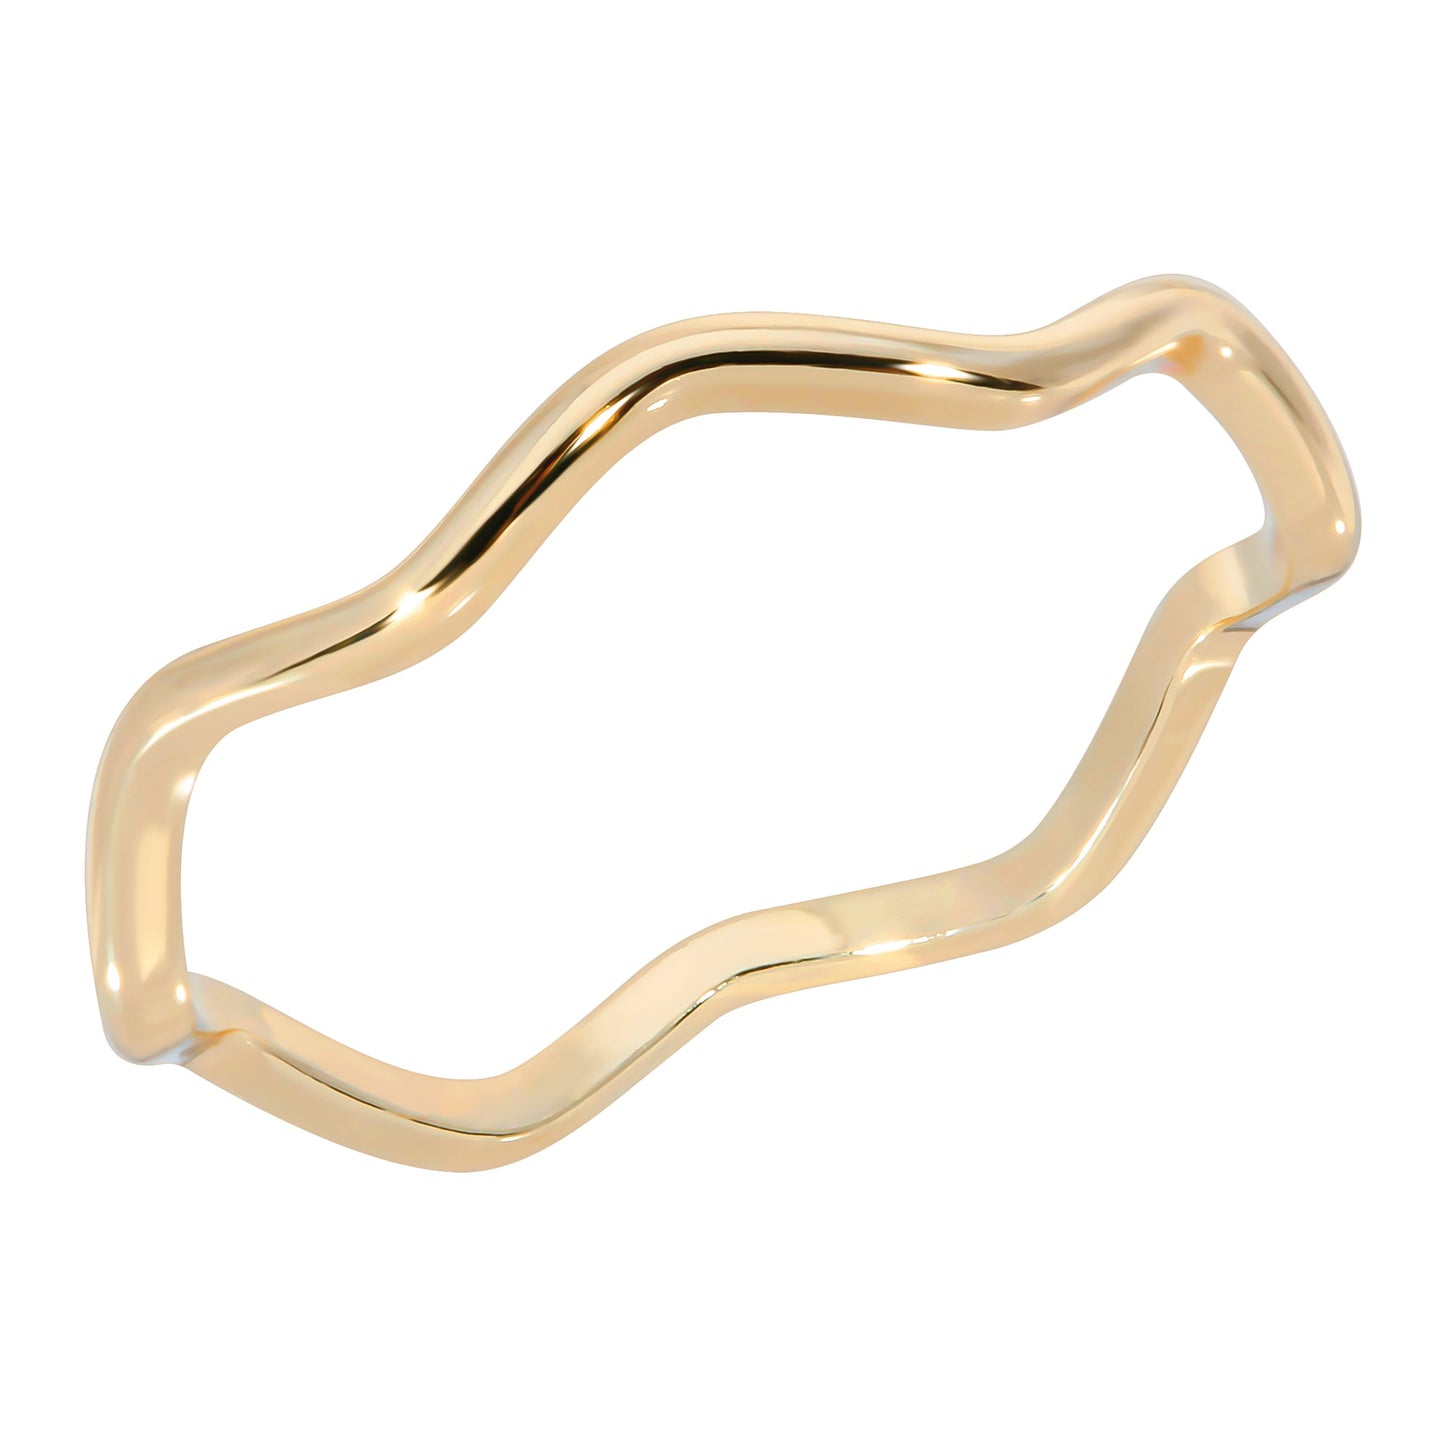 Super Thin Wavy Ring in Gold or Silver | eklexic Jewelry